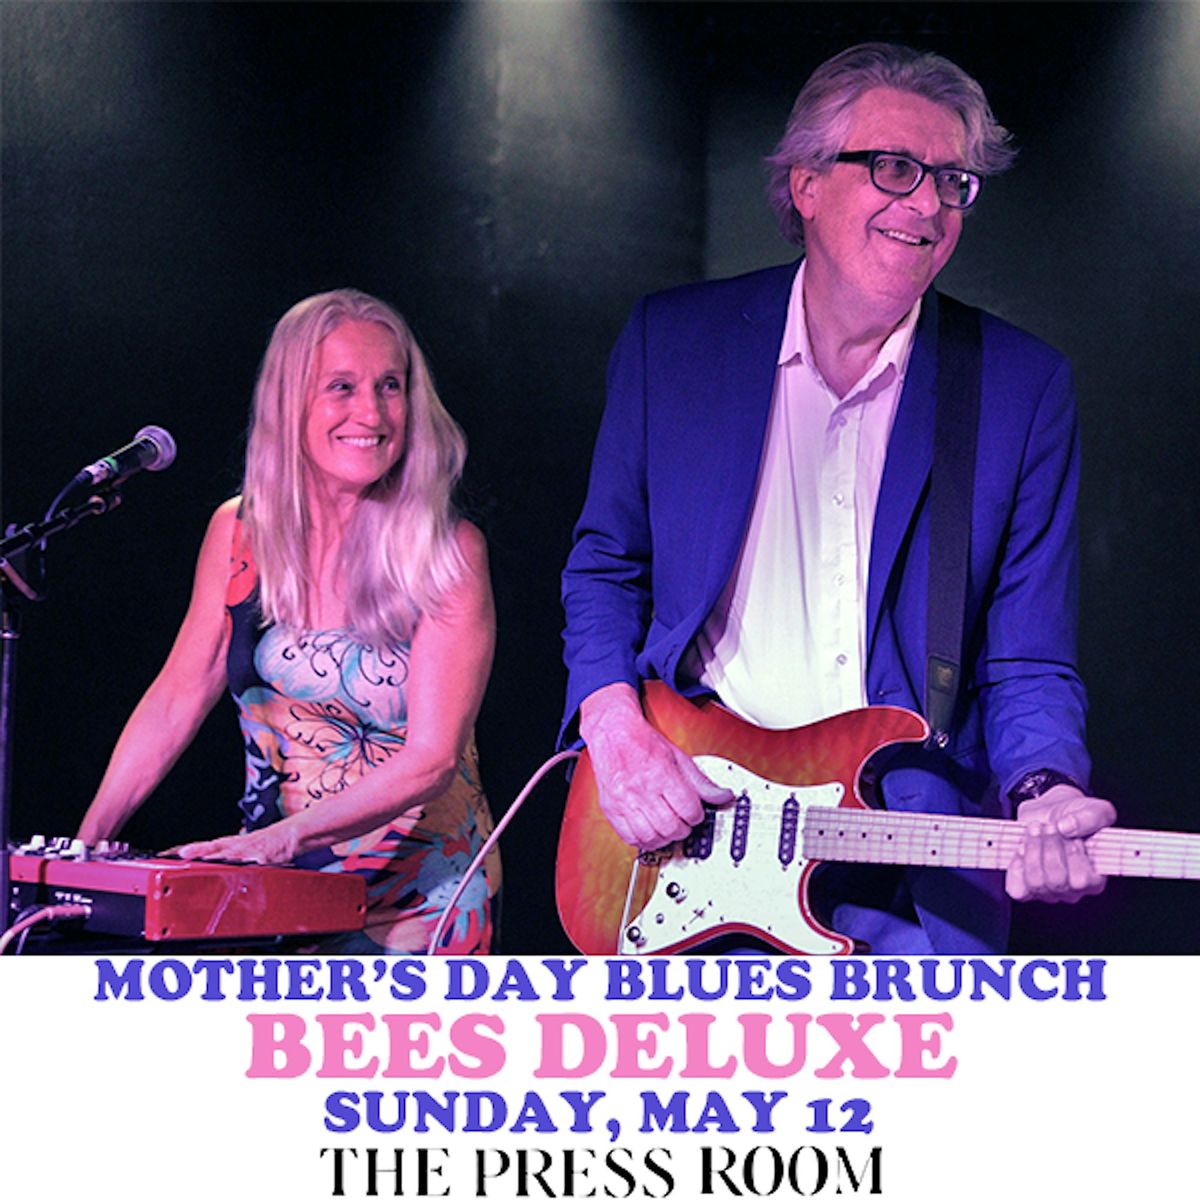 Mother's Day Blues Brunch: Bees Deluxe